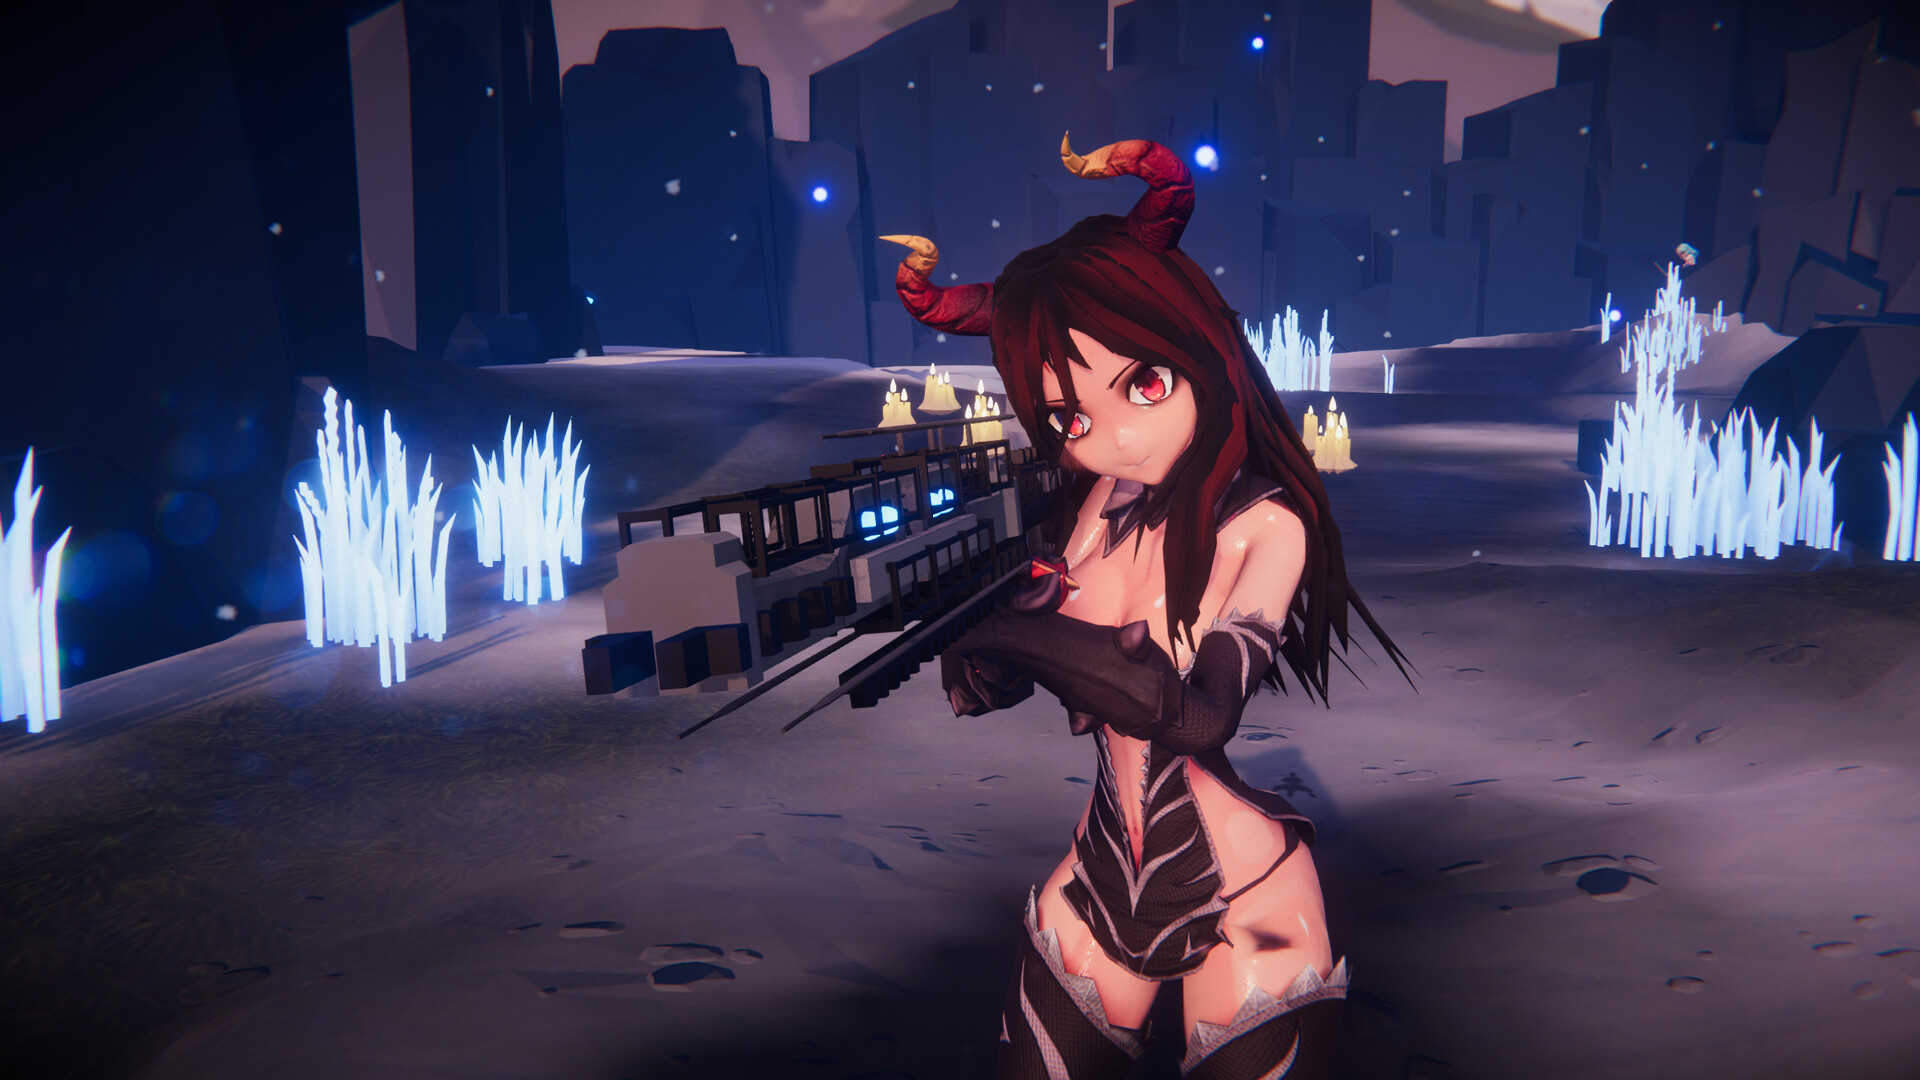 Succubus With Guns - Campaign "WINDING PATH" Free Download